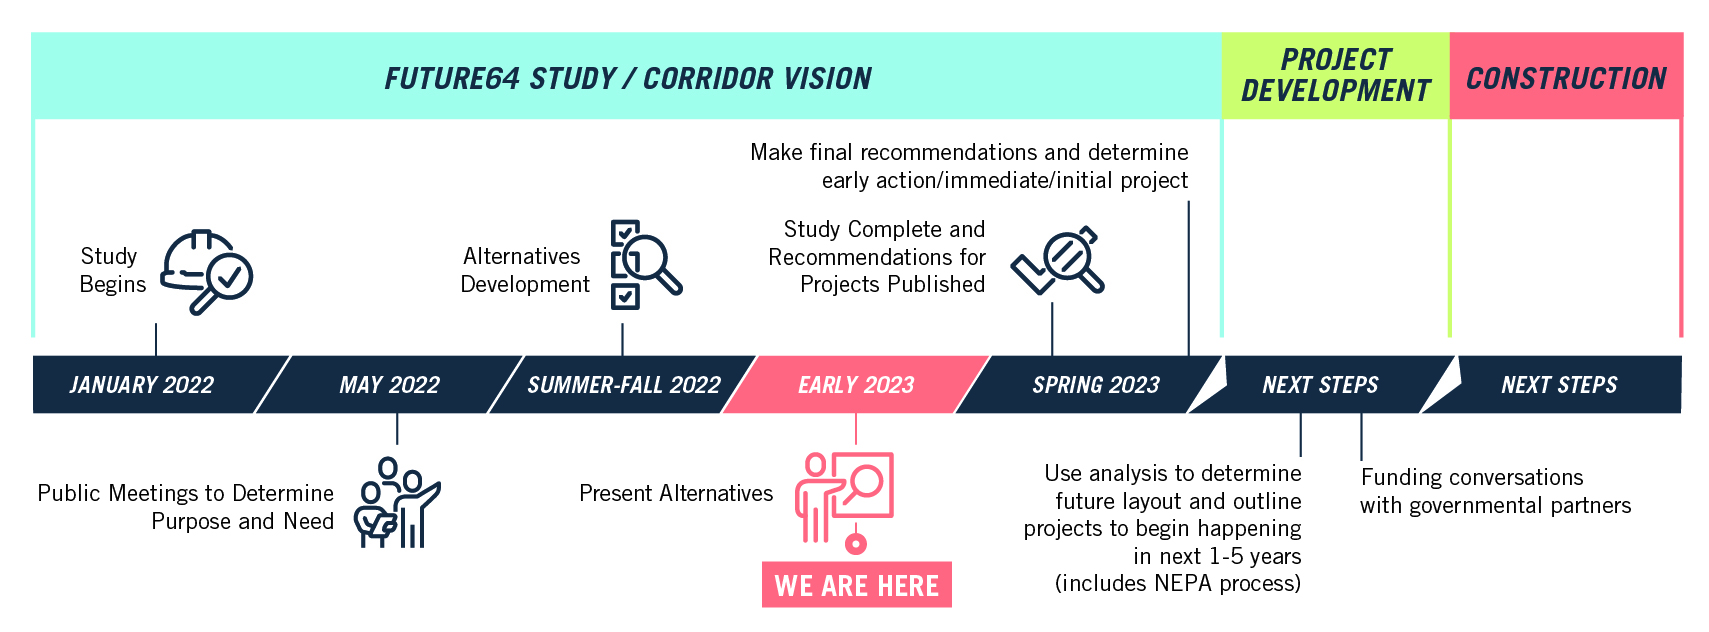 Spring 2023: Study Complete and recommendations for projects published. Future efforts include: Environmental Planning (NEPA) including Planning, Design, and Public Engagement.